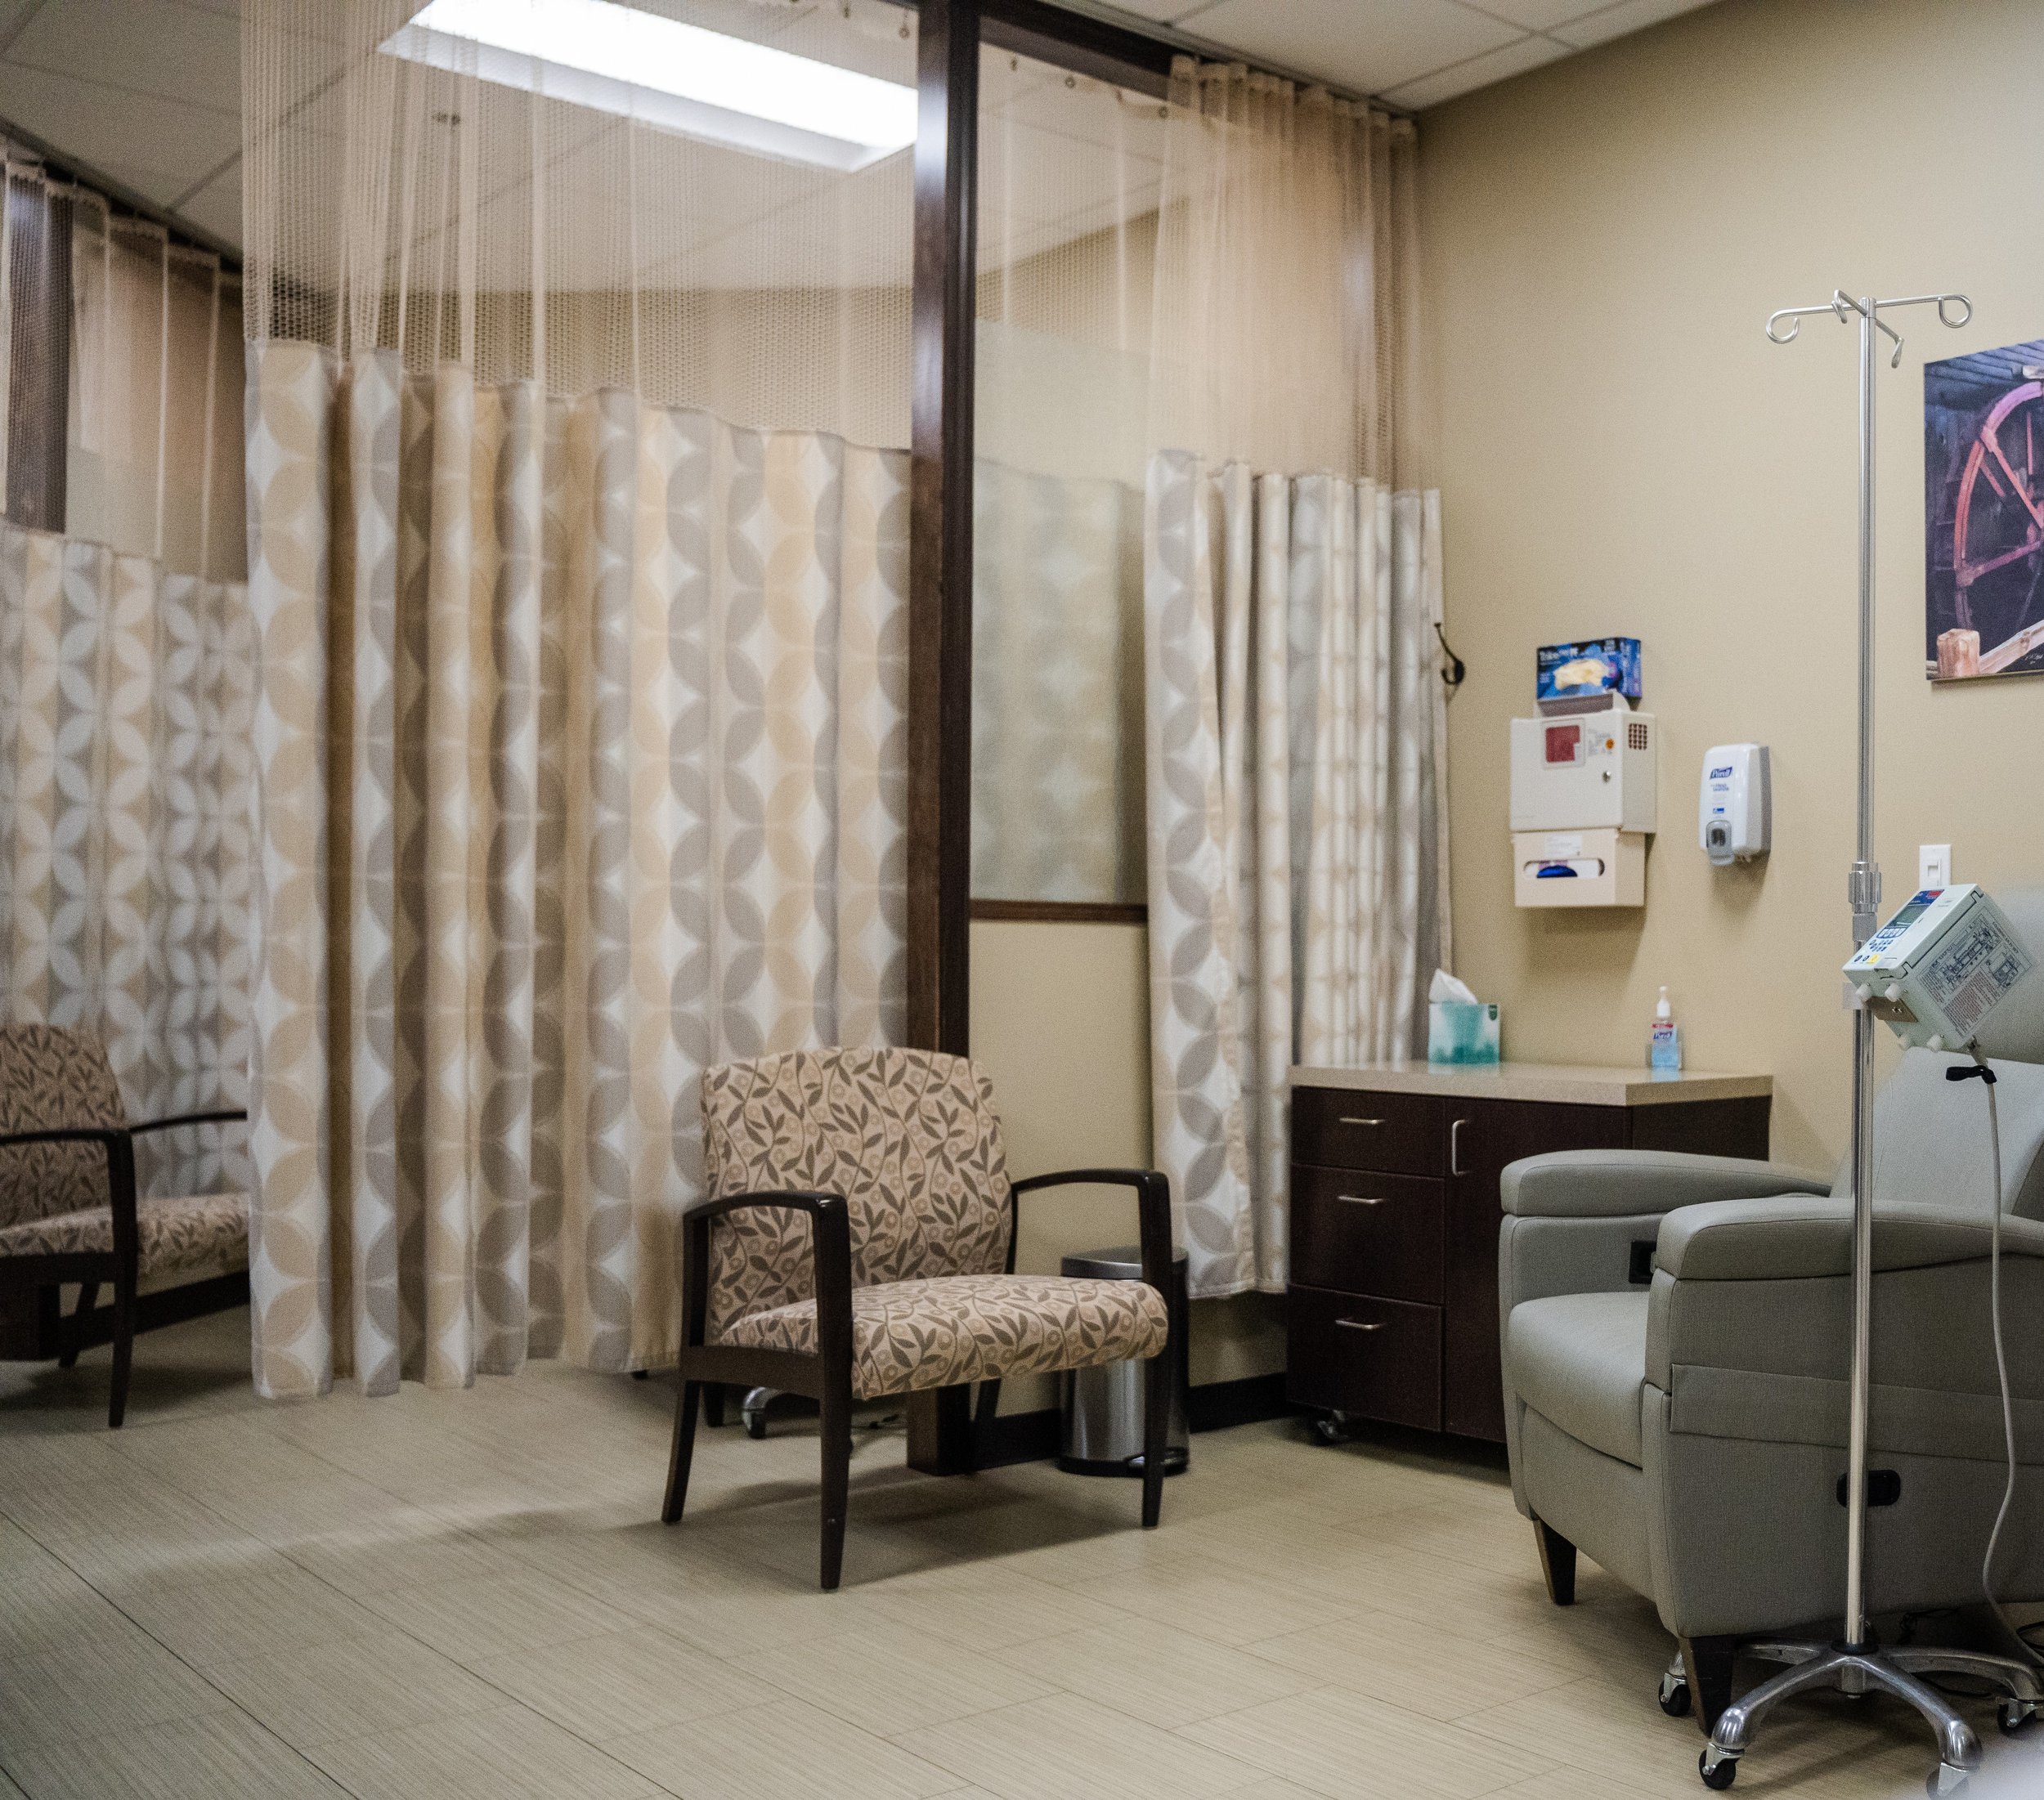 Outpatient infusion center in Kalamazoo, Michigan, 49009